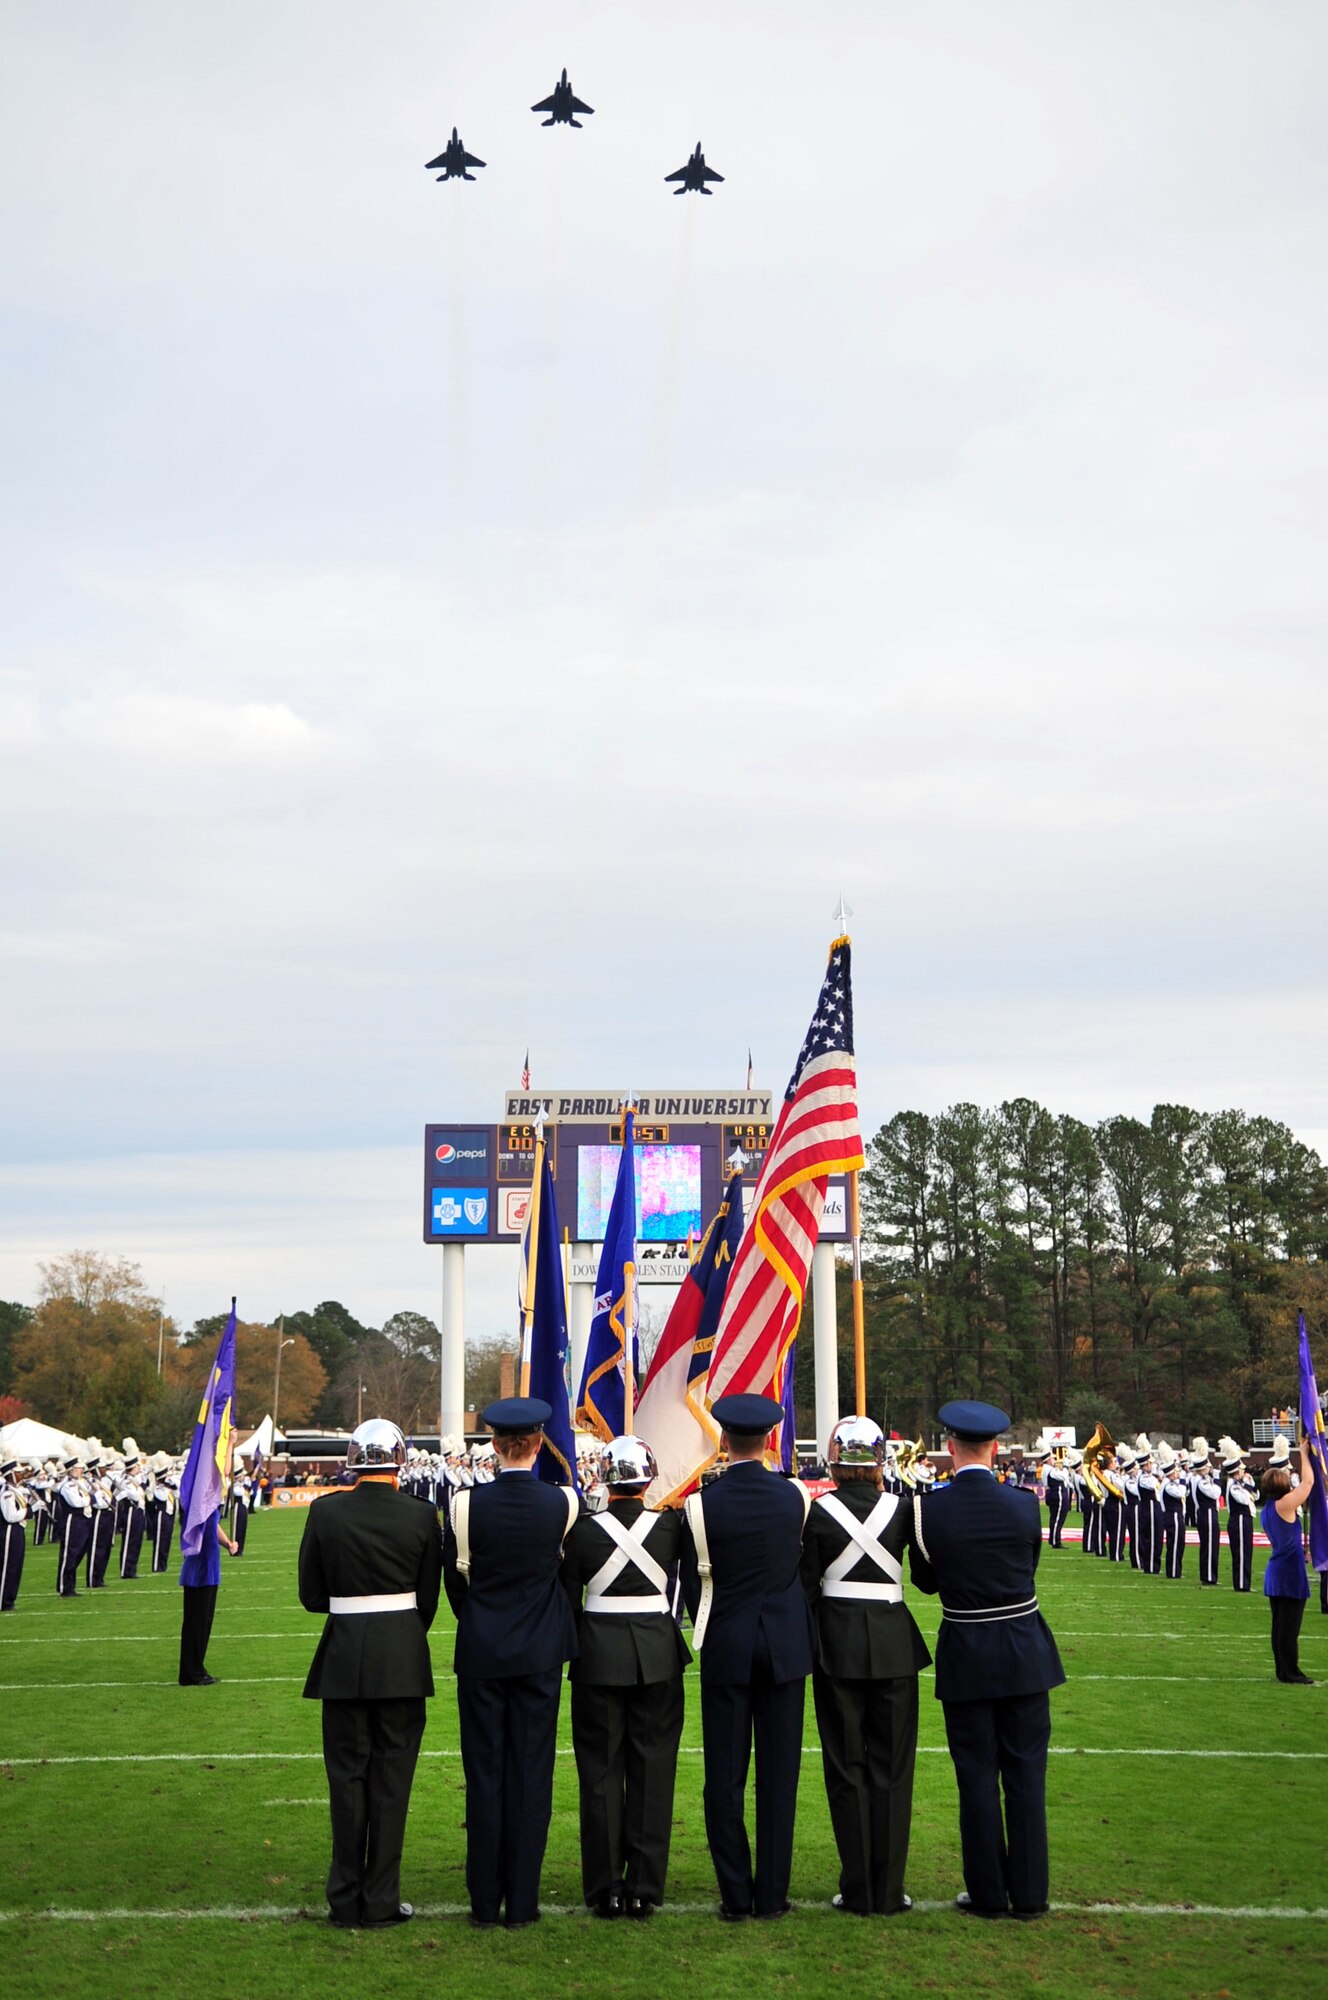 Members of the East Carolina University Air Force and Army Reserve Officer Training Corps present the colors as F-15E Strike Eagles flyover the ECU Dowdy-Ficklen Stadium, Greenville, N.C., Nov. 21, 2009. The F-15Es are based out of Seymour Johnson Air Force Base in Goldsboro, N.C. (U.S. Air Force photo/Airman 1st Class Rae Perry) 